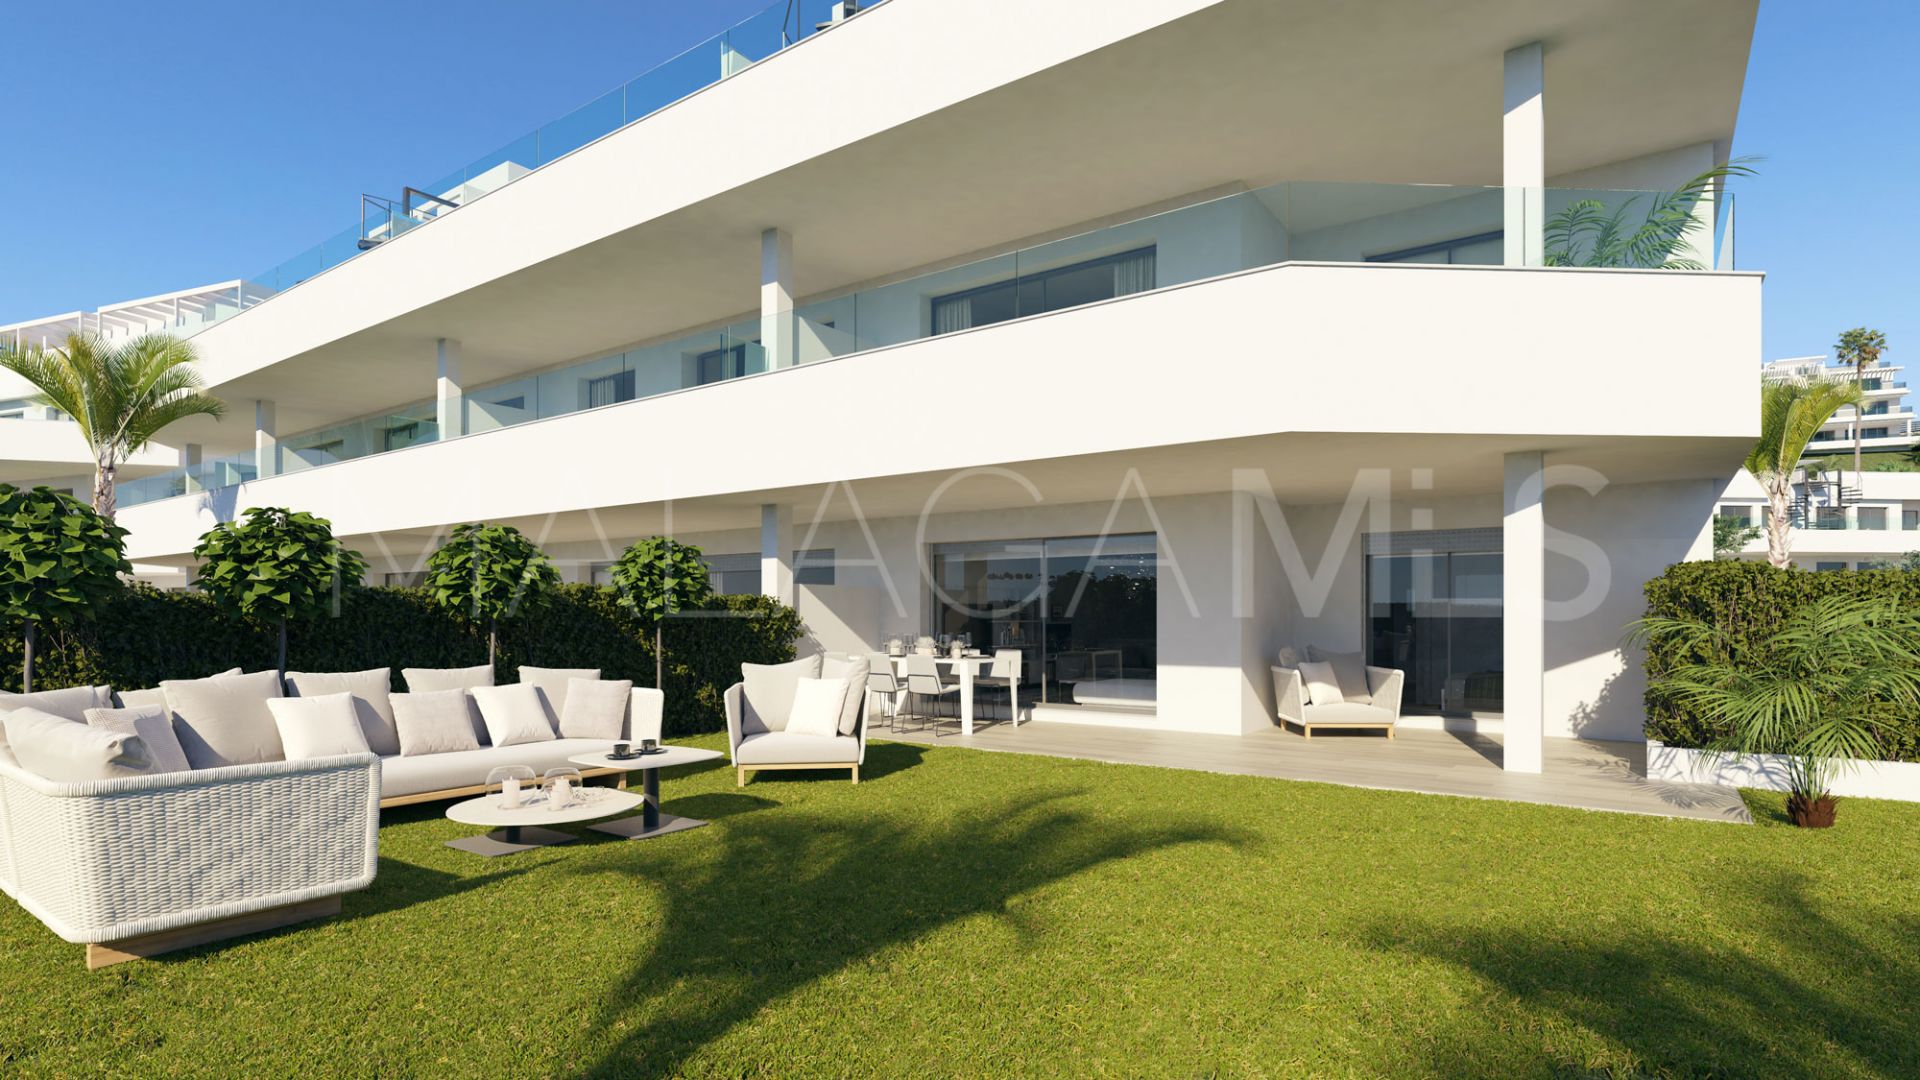 Cancelada, apartamento for sale with 2 bedrooms